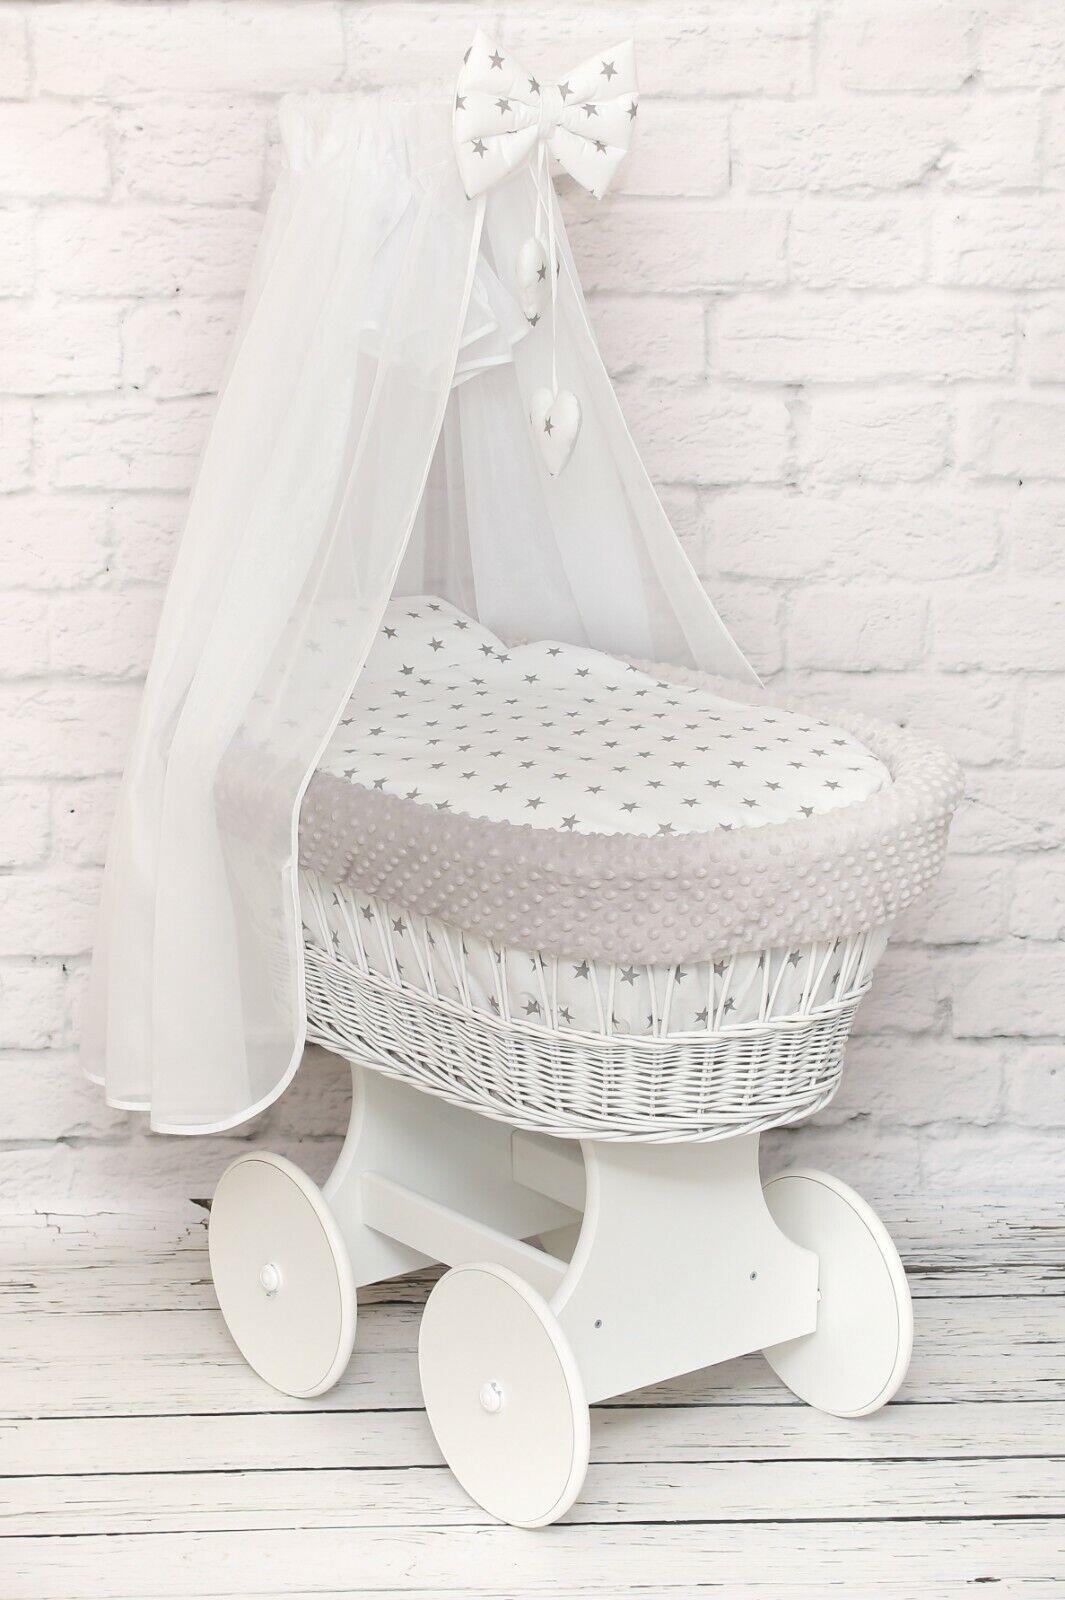 White Wicker Moses Basket with Wheels Baby+full Bedding Set Dimple Grey/ Small stars on White